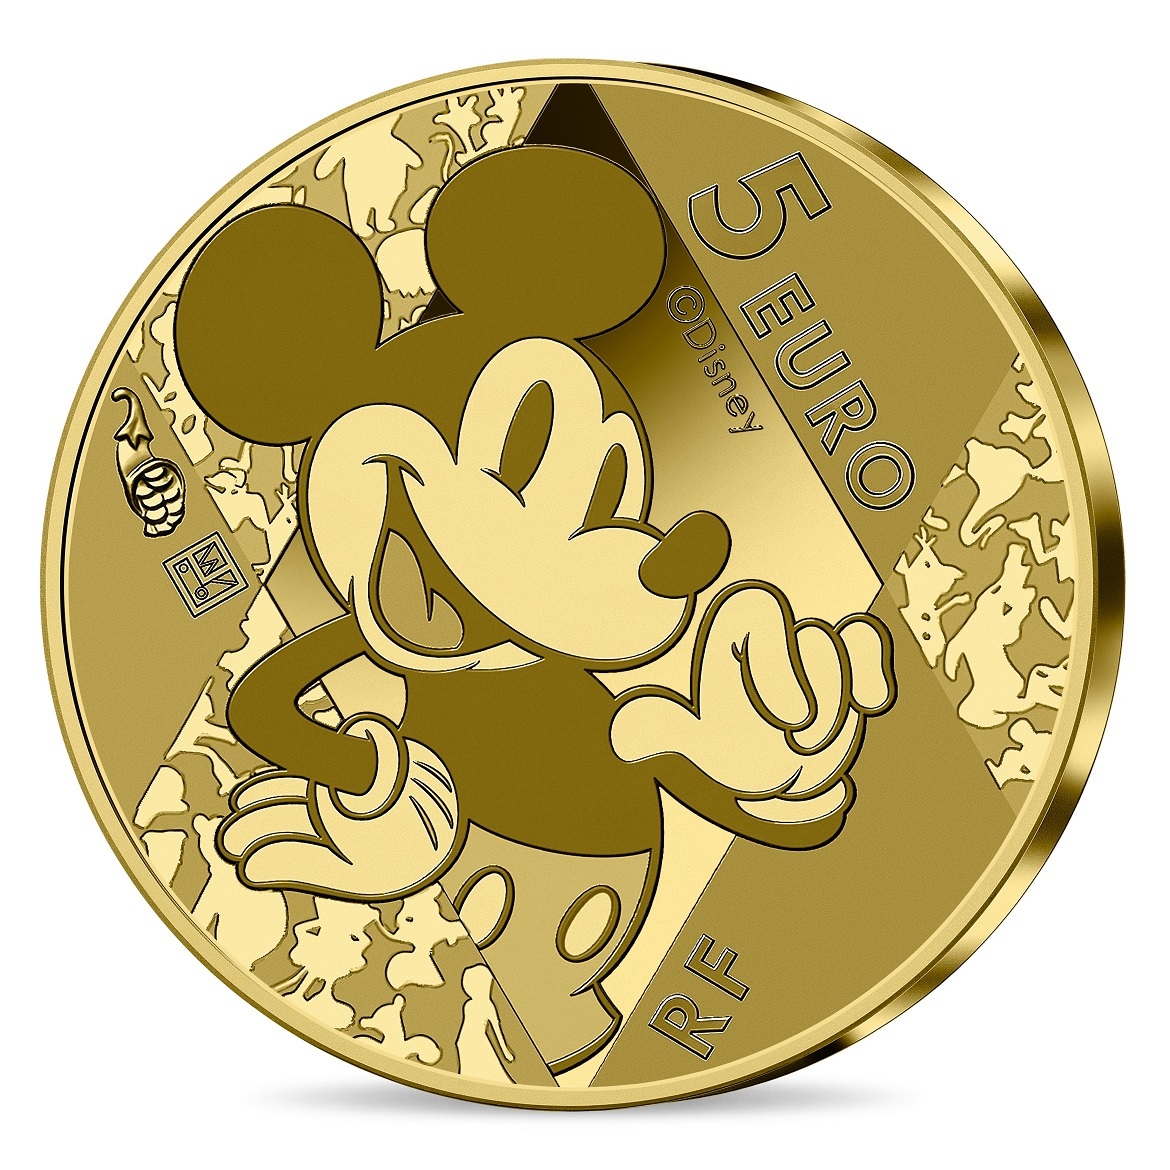 (EUR07.Proof.2023.10041378020000) 5 euro France 2023 Proof gold - Disney Studios 100 Years (Minnie Mouse) Reverse (zoom)